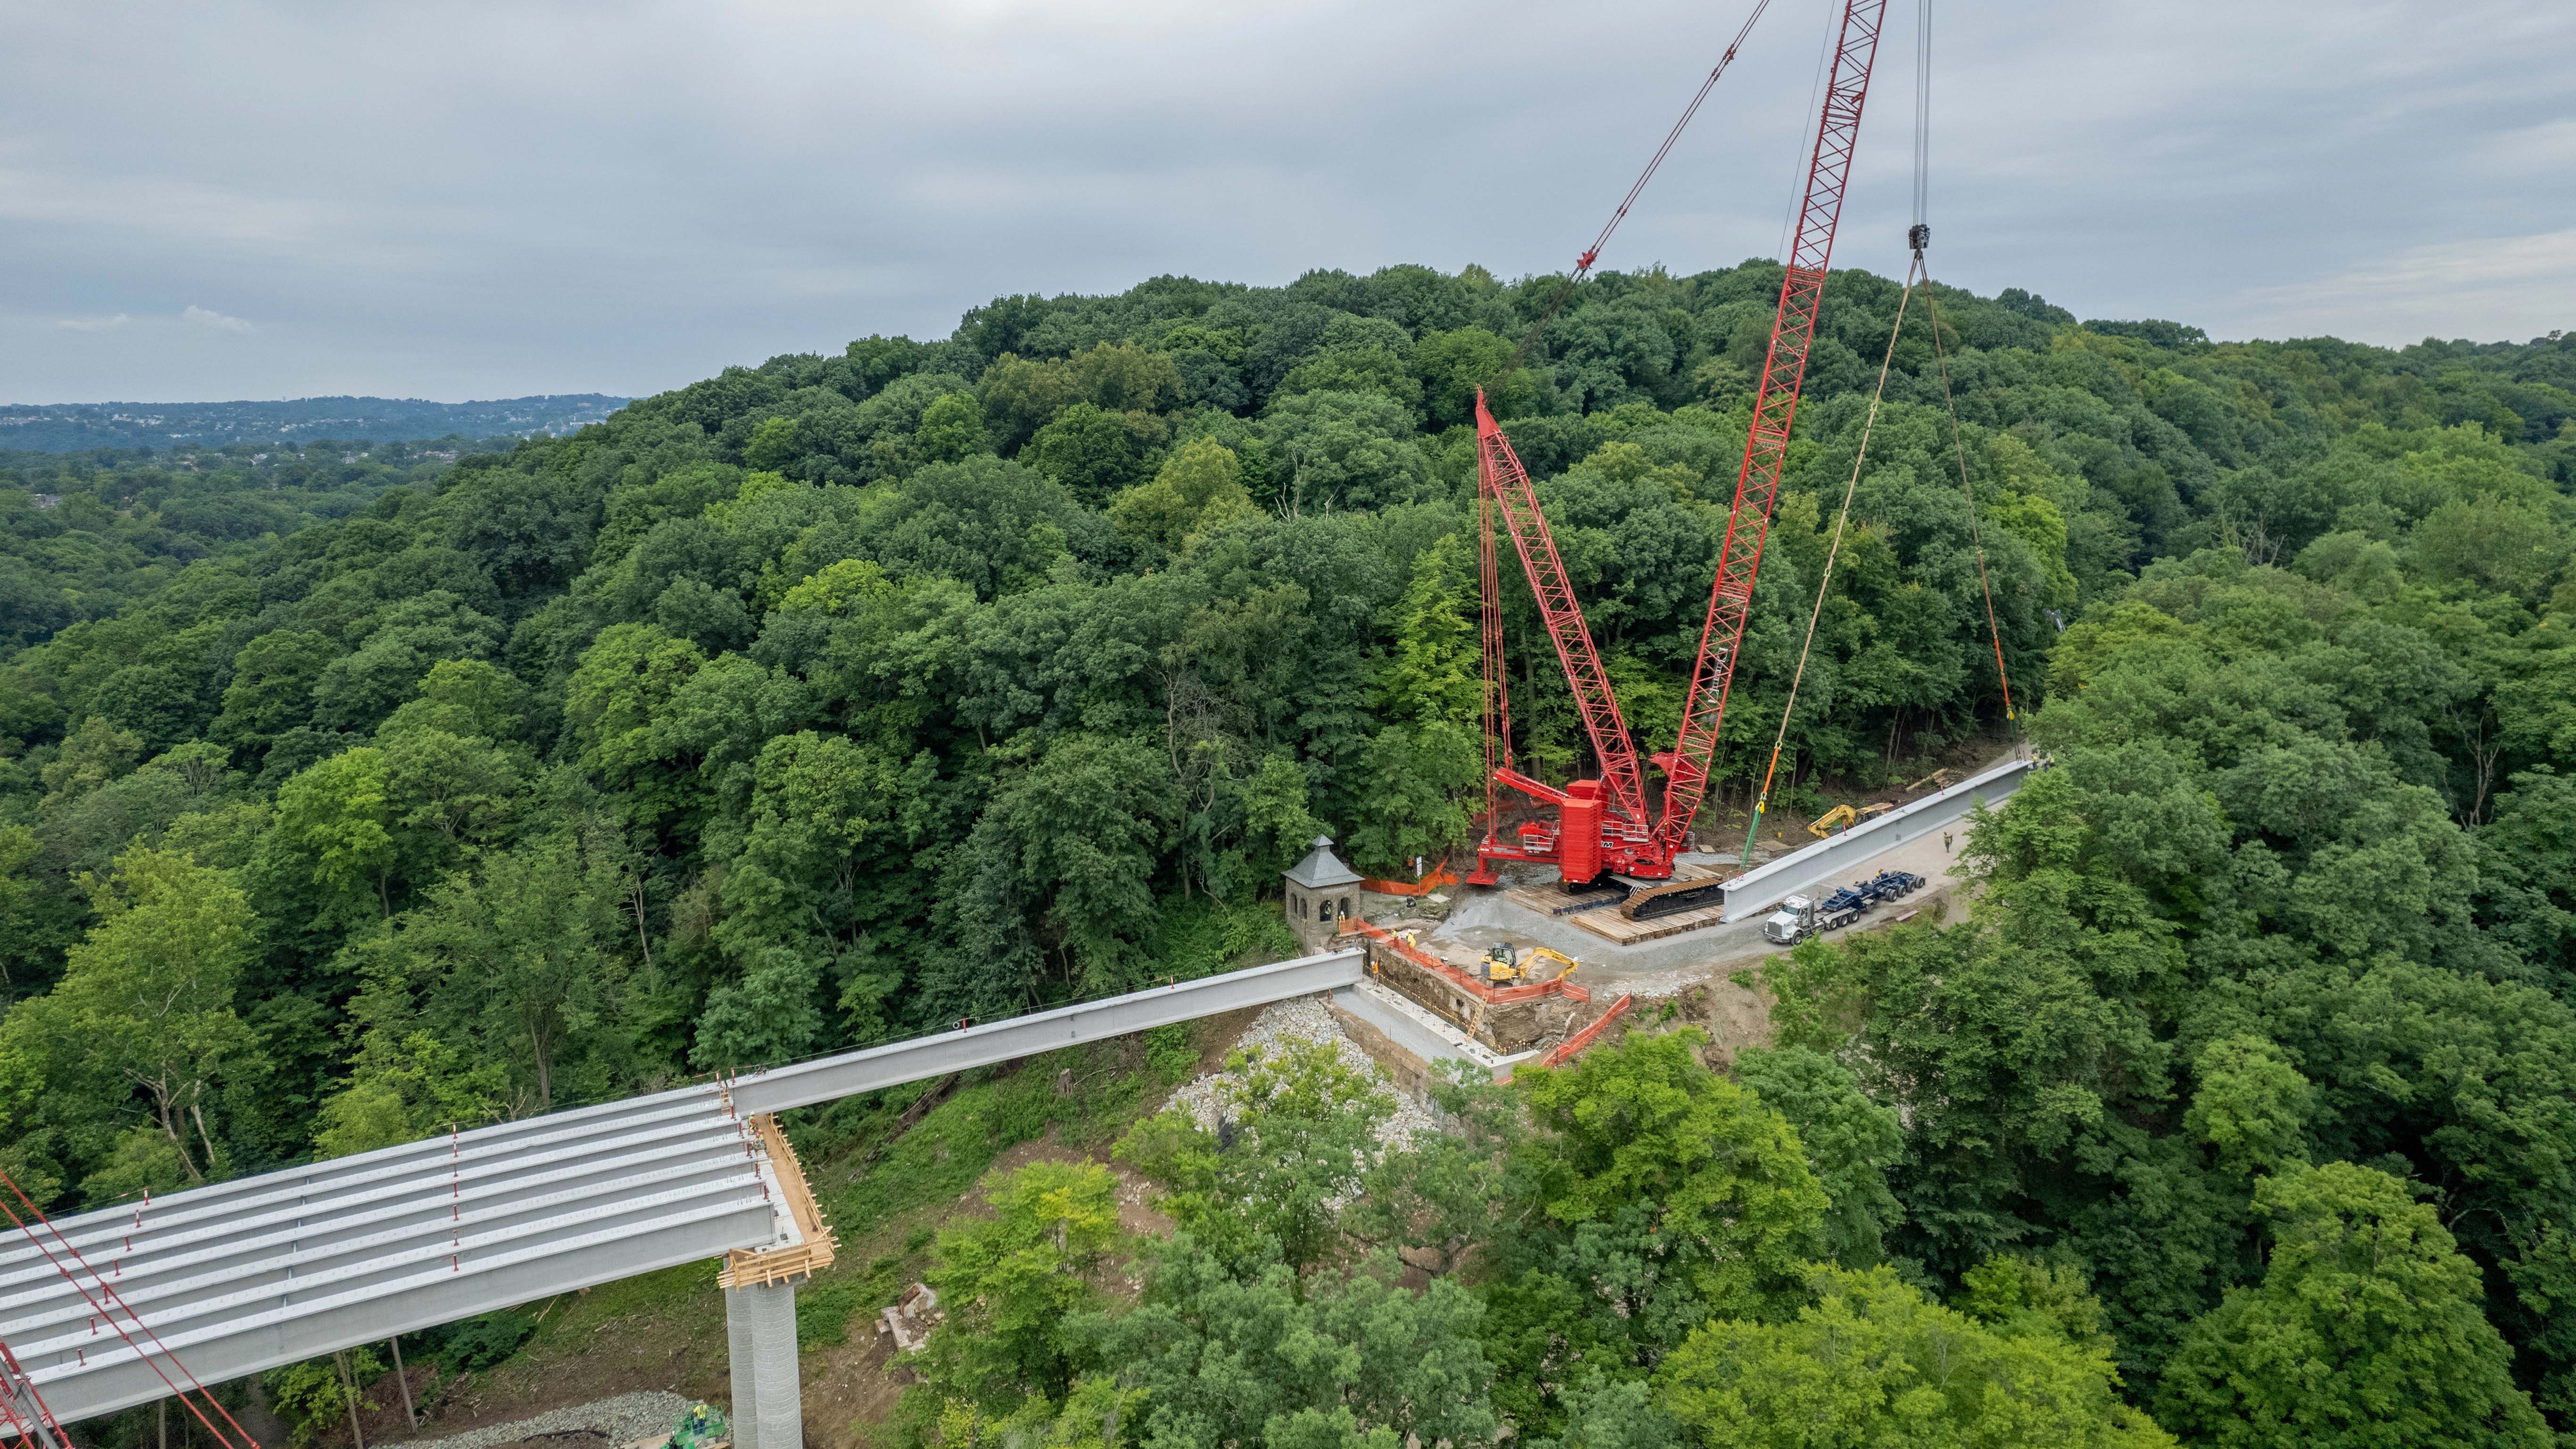 An image of a large red crane lifting and placing bridge beams during the rebuilding of the Fern Hollow Bridge 